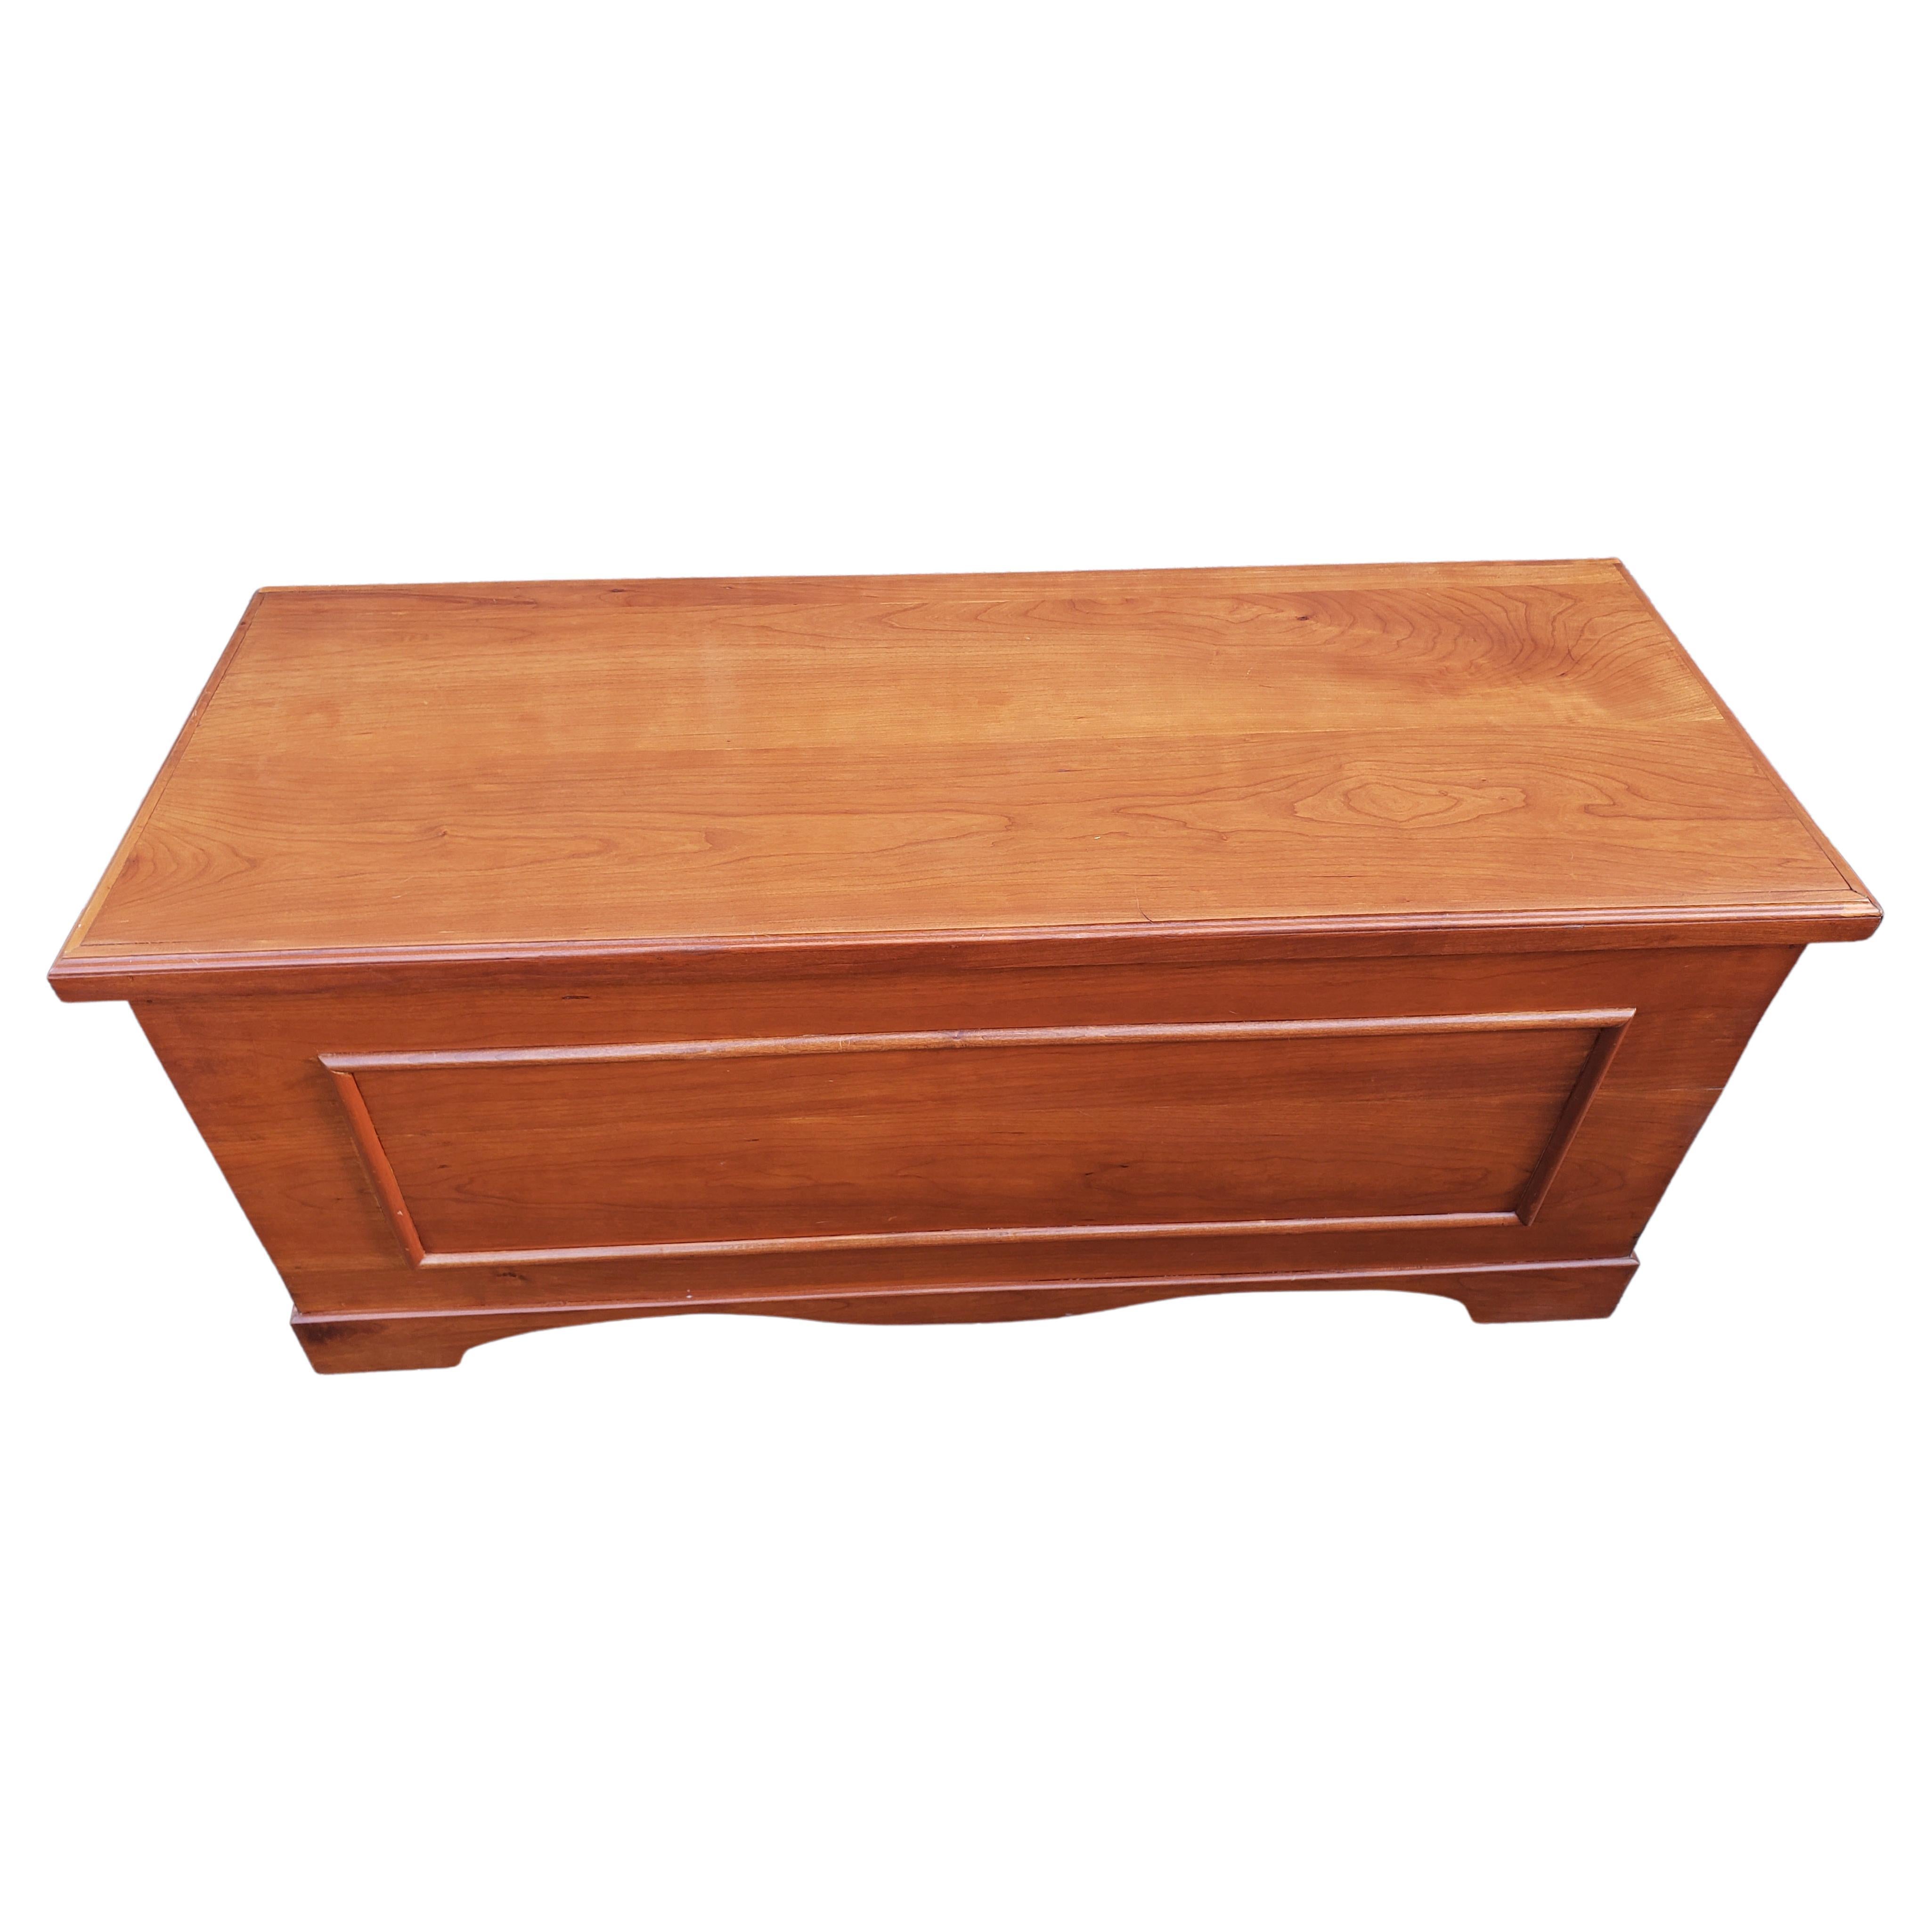 American Classical solid cherry cedar lined blanket chest. Very well kept and in excellent condition. Quality American craftsmanship in simplicity and elegance.
Measurements are 45.75